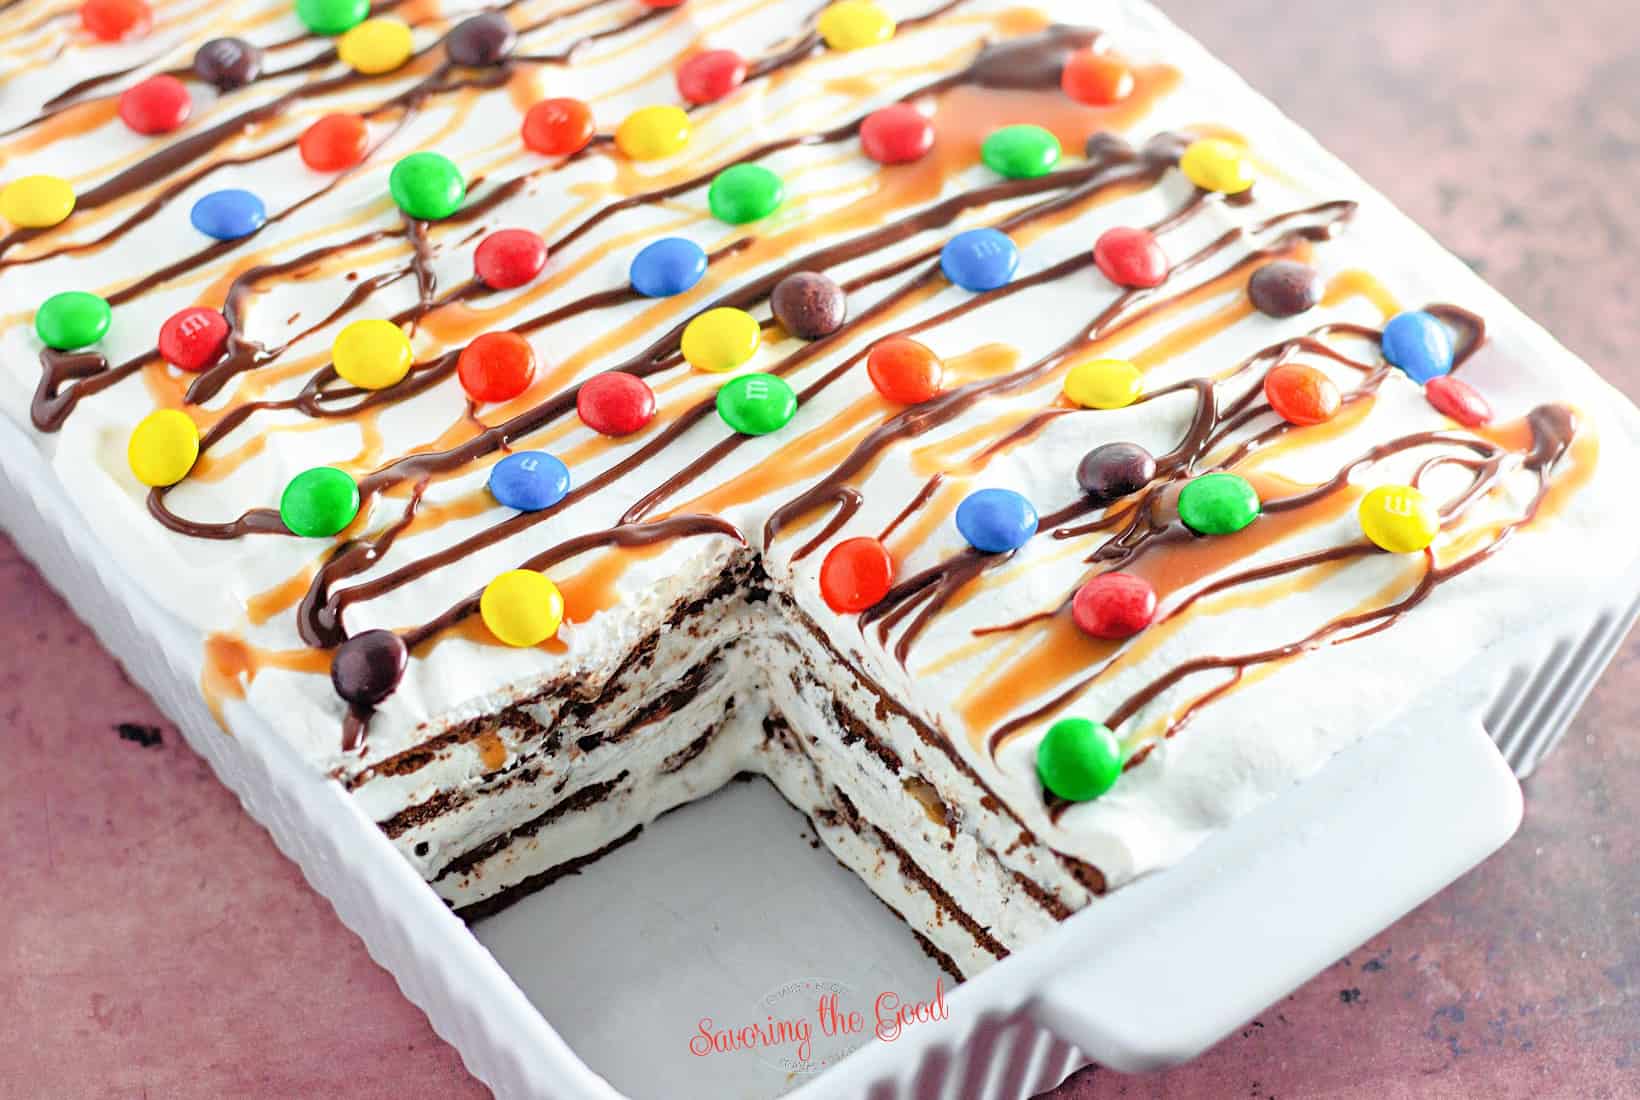 horizontal image of ice cream bar cake with a slice taken out of it in a white 9x13 pan.